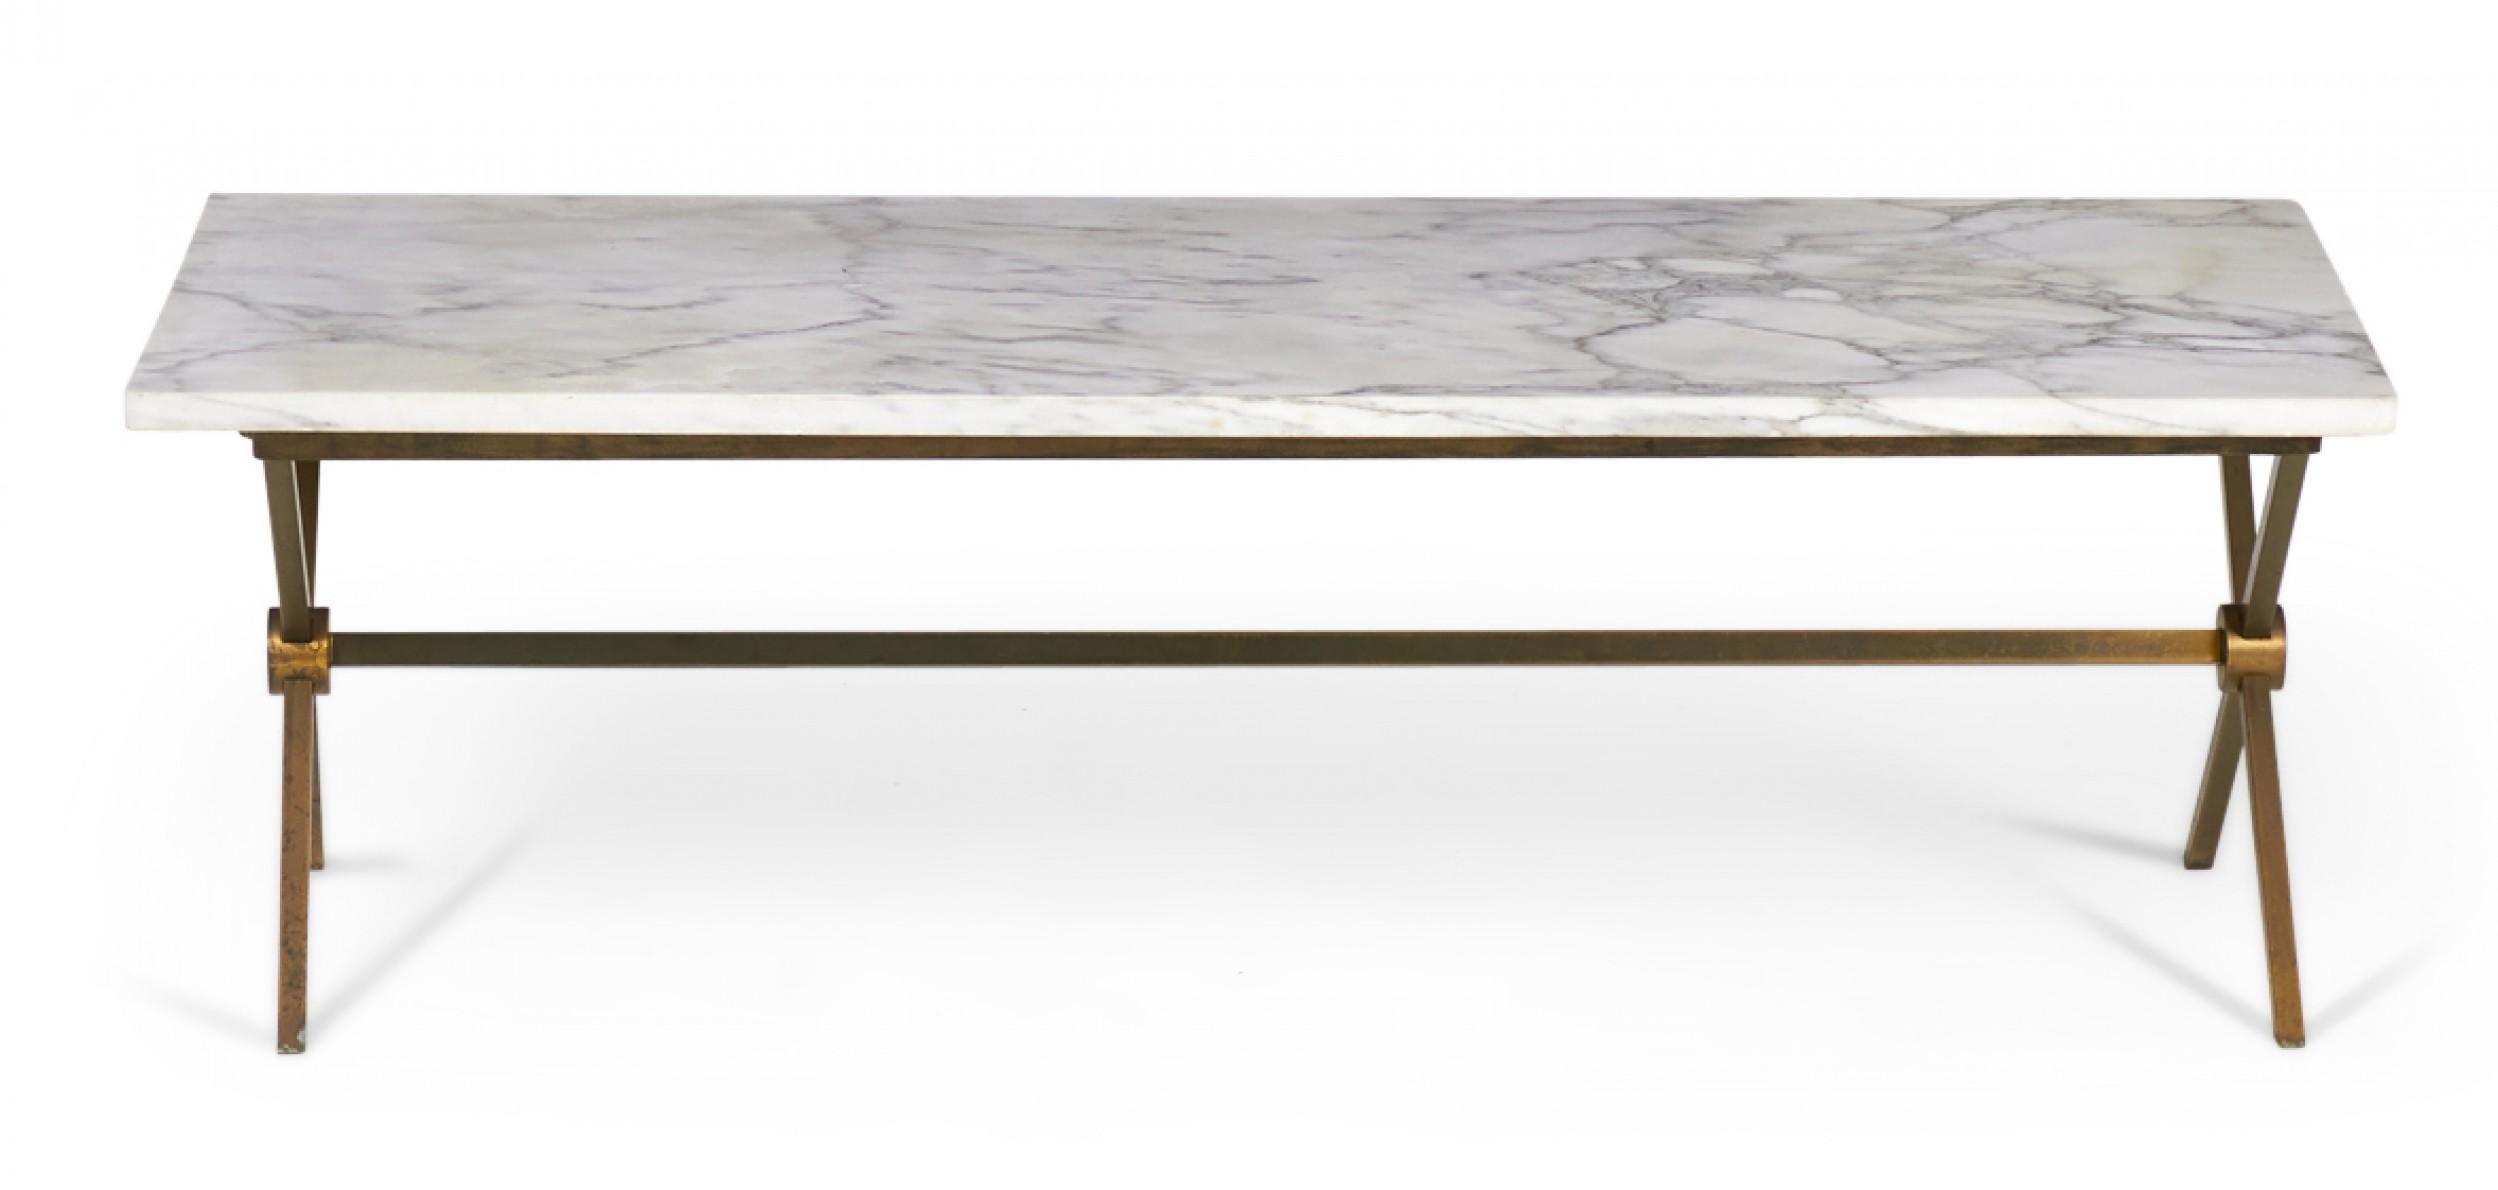 American mid-century rectangular coffee table with a brass x-shaped frame with stretcher supporting a white and gray Carrara marble table top. (manner of Maison Jansen).